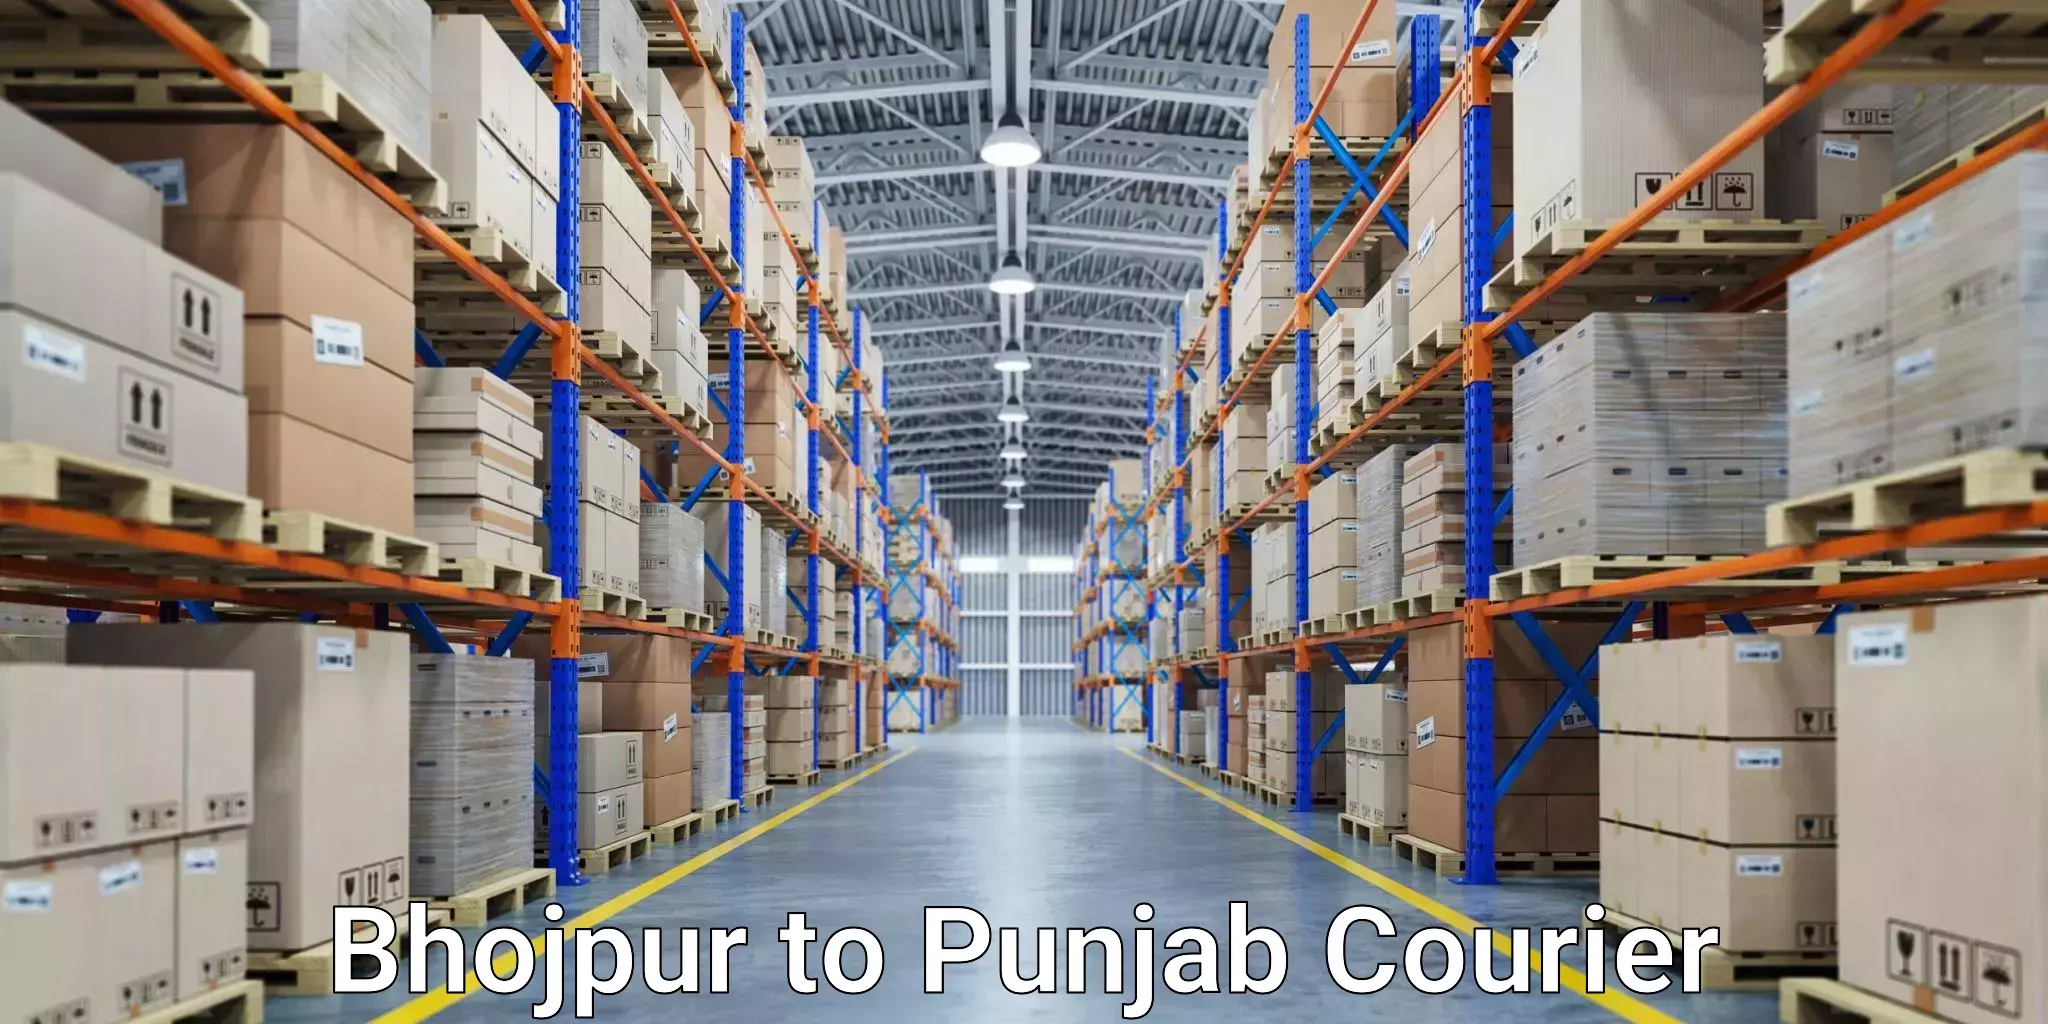 Express delivery solutions Bhojpur to Adampur Jalandhar